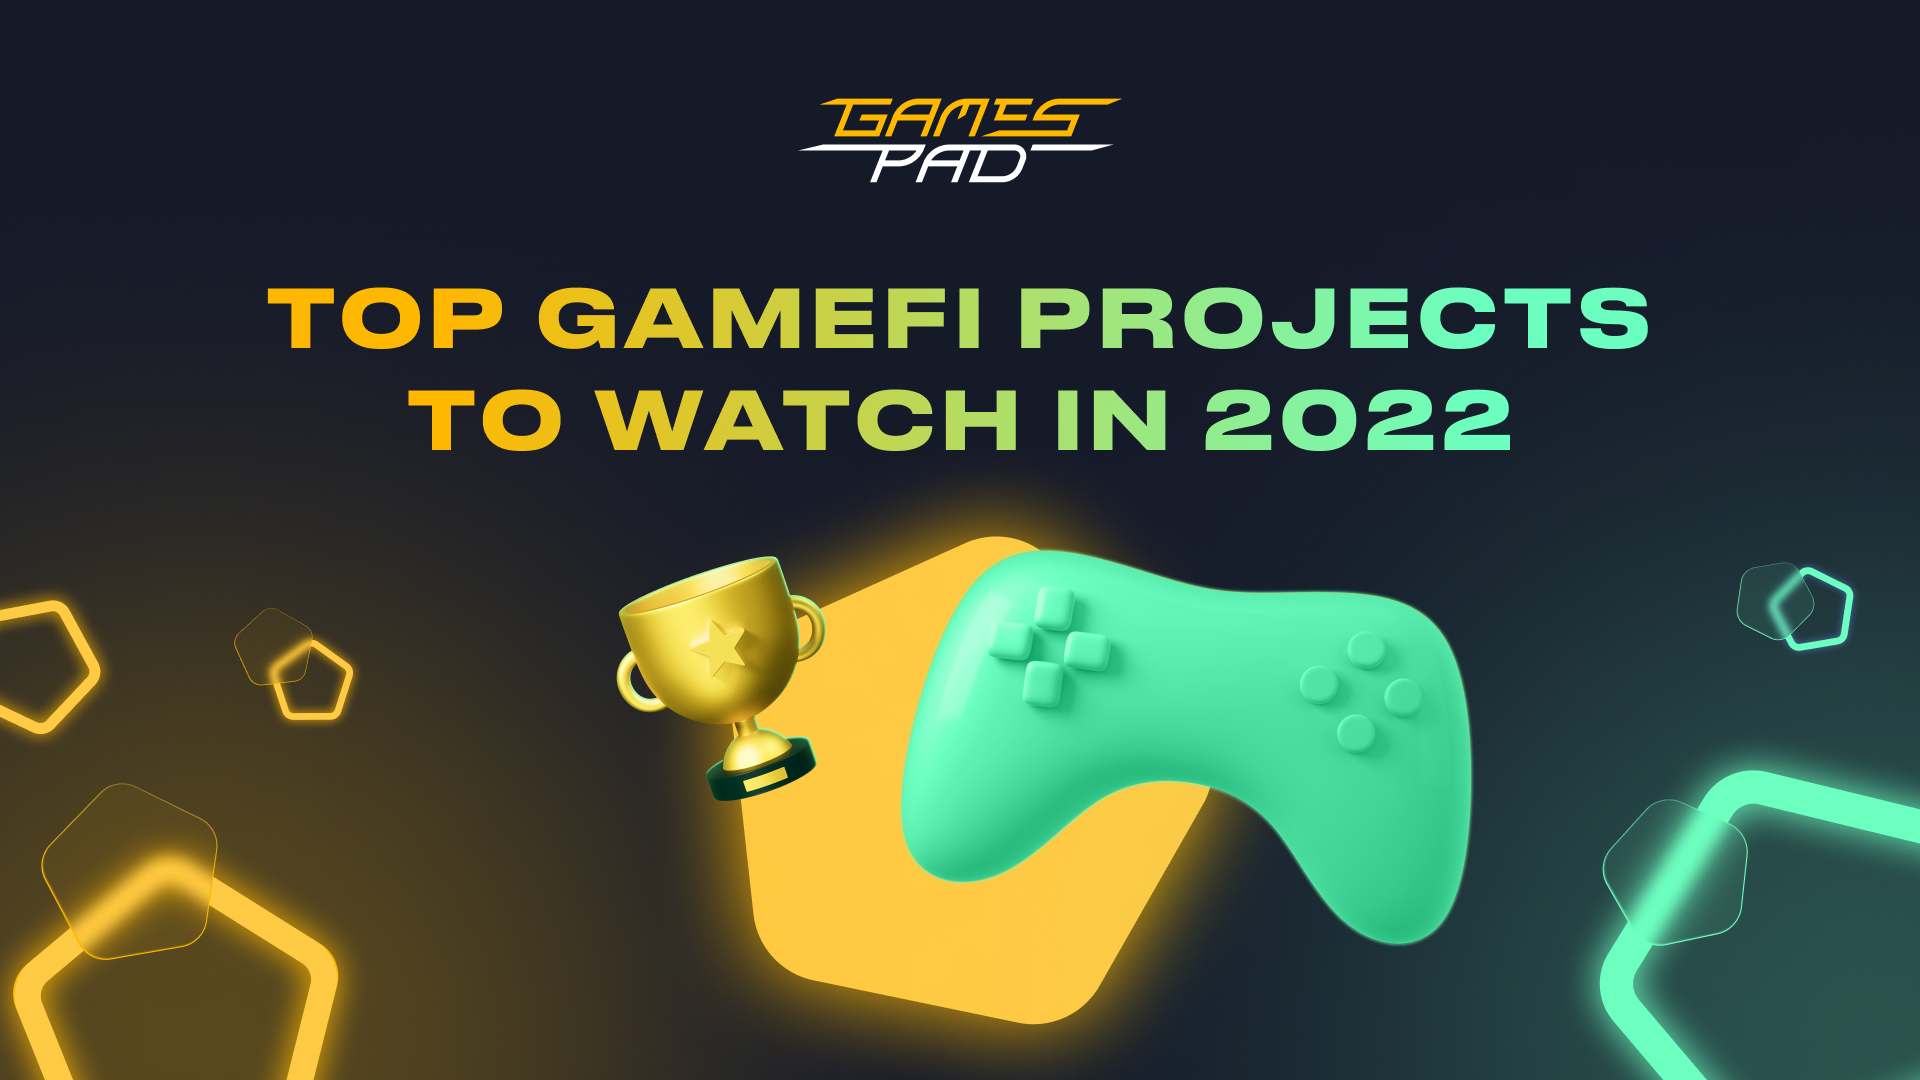 Top GameFi Projects to Watch in 2022